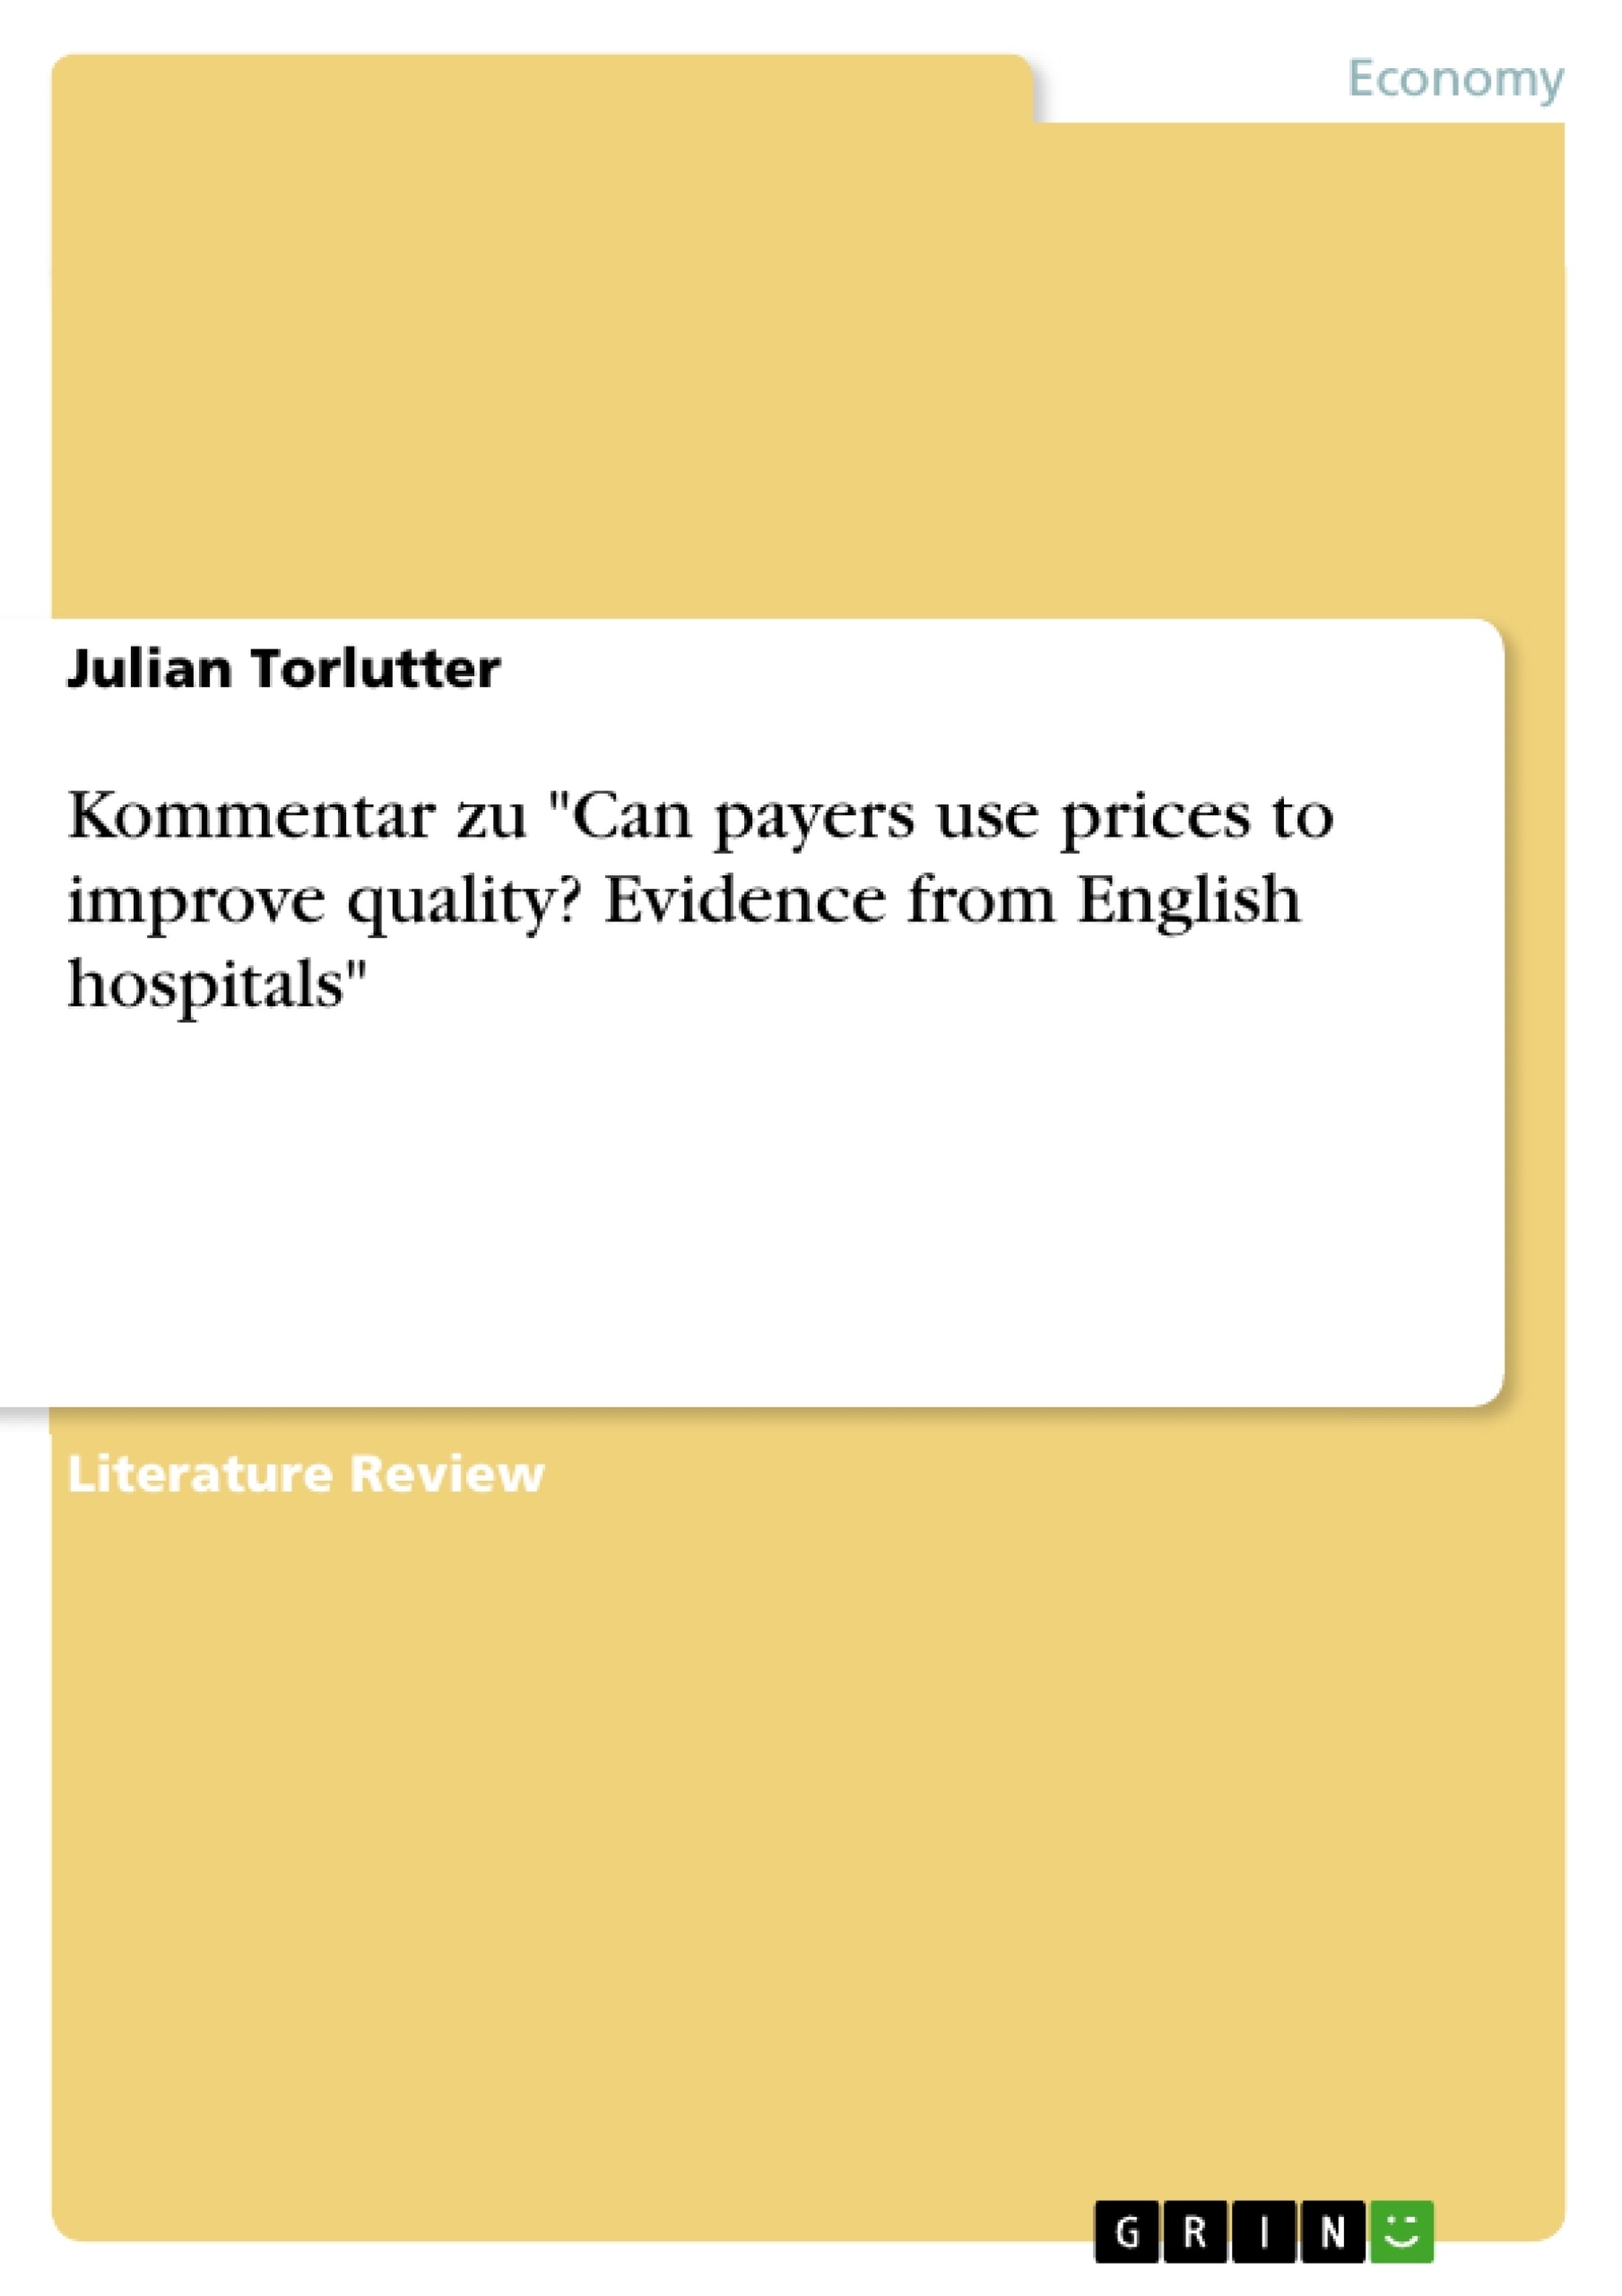 Título: Kommentar zu "Can payers use prices to improve quality? Evidence from English hospitals"